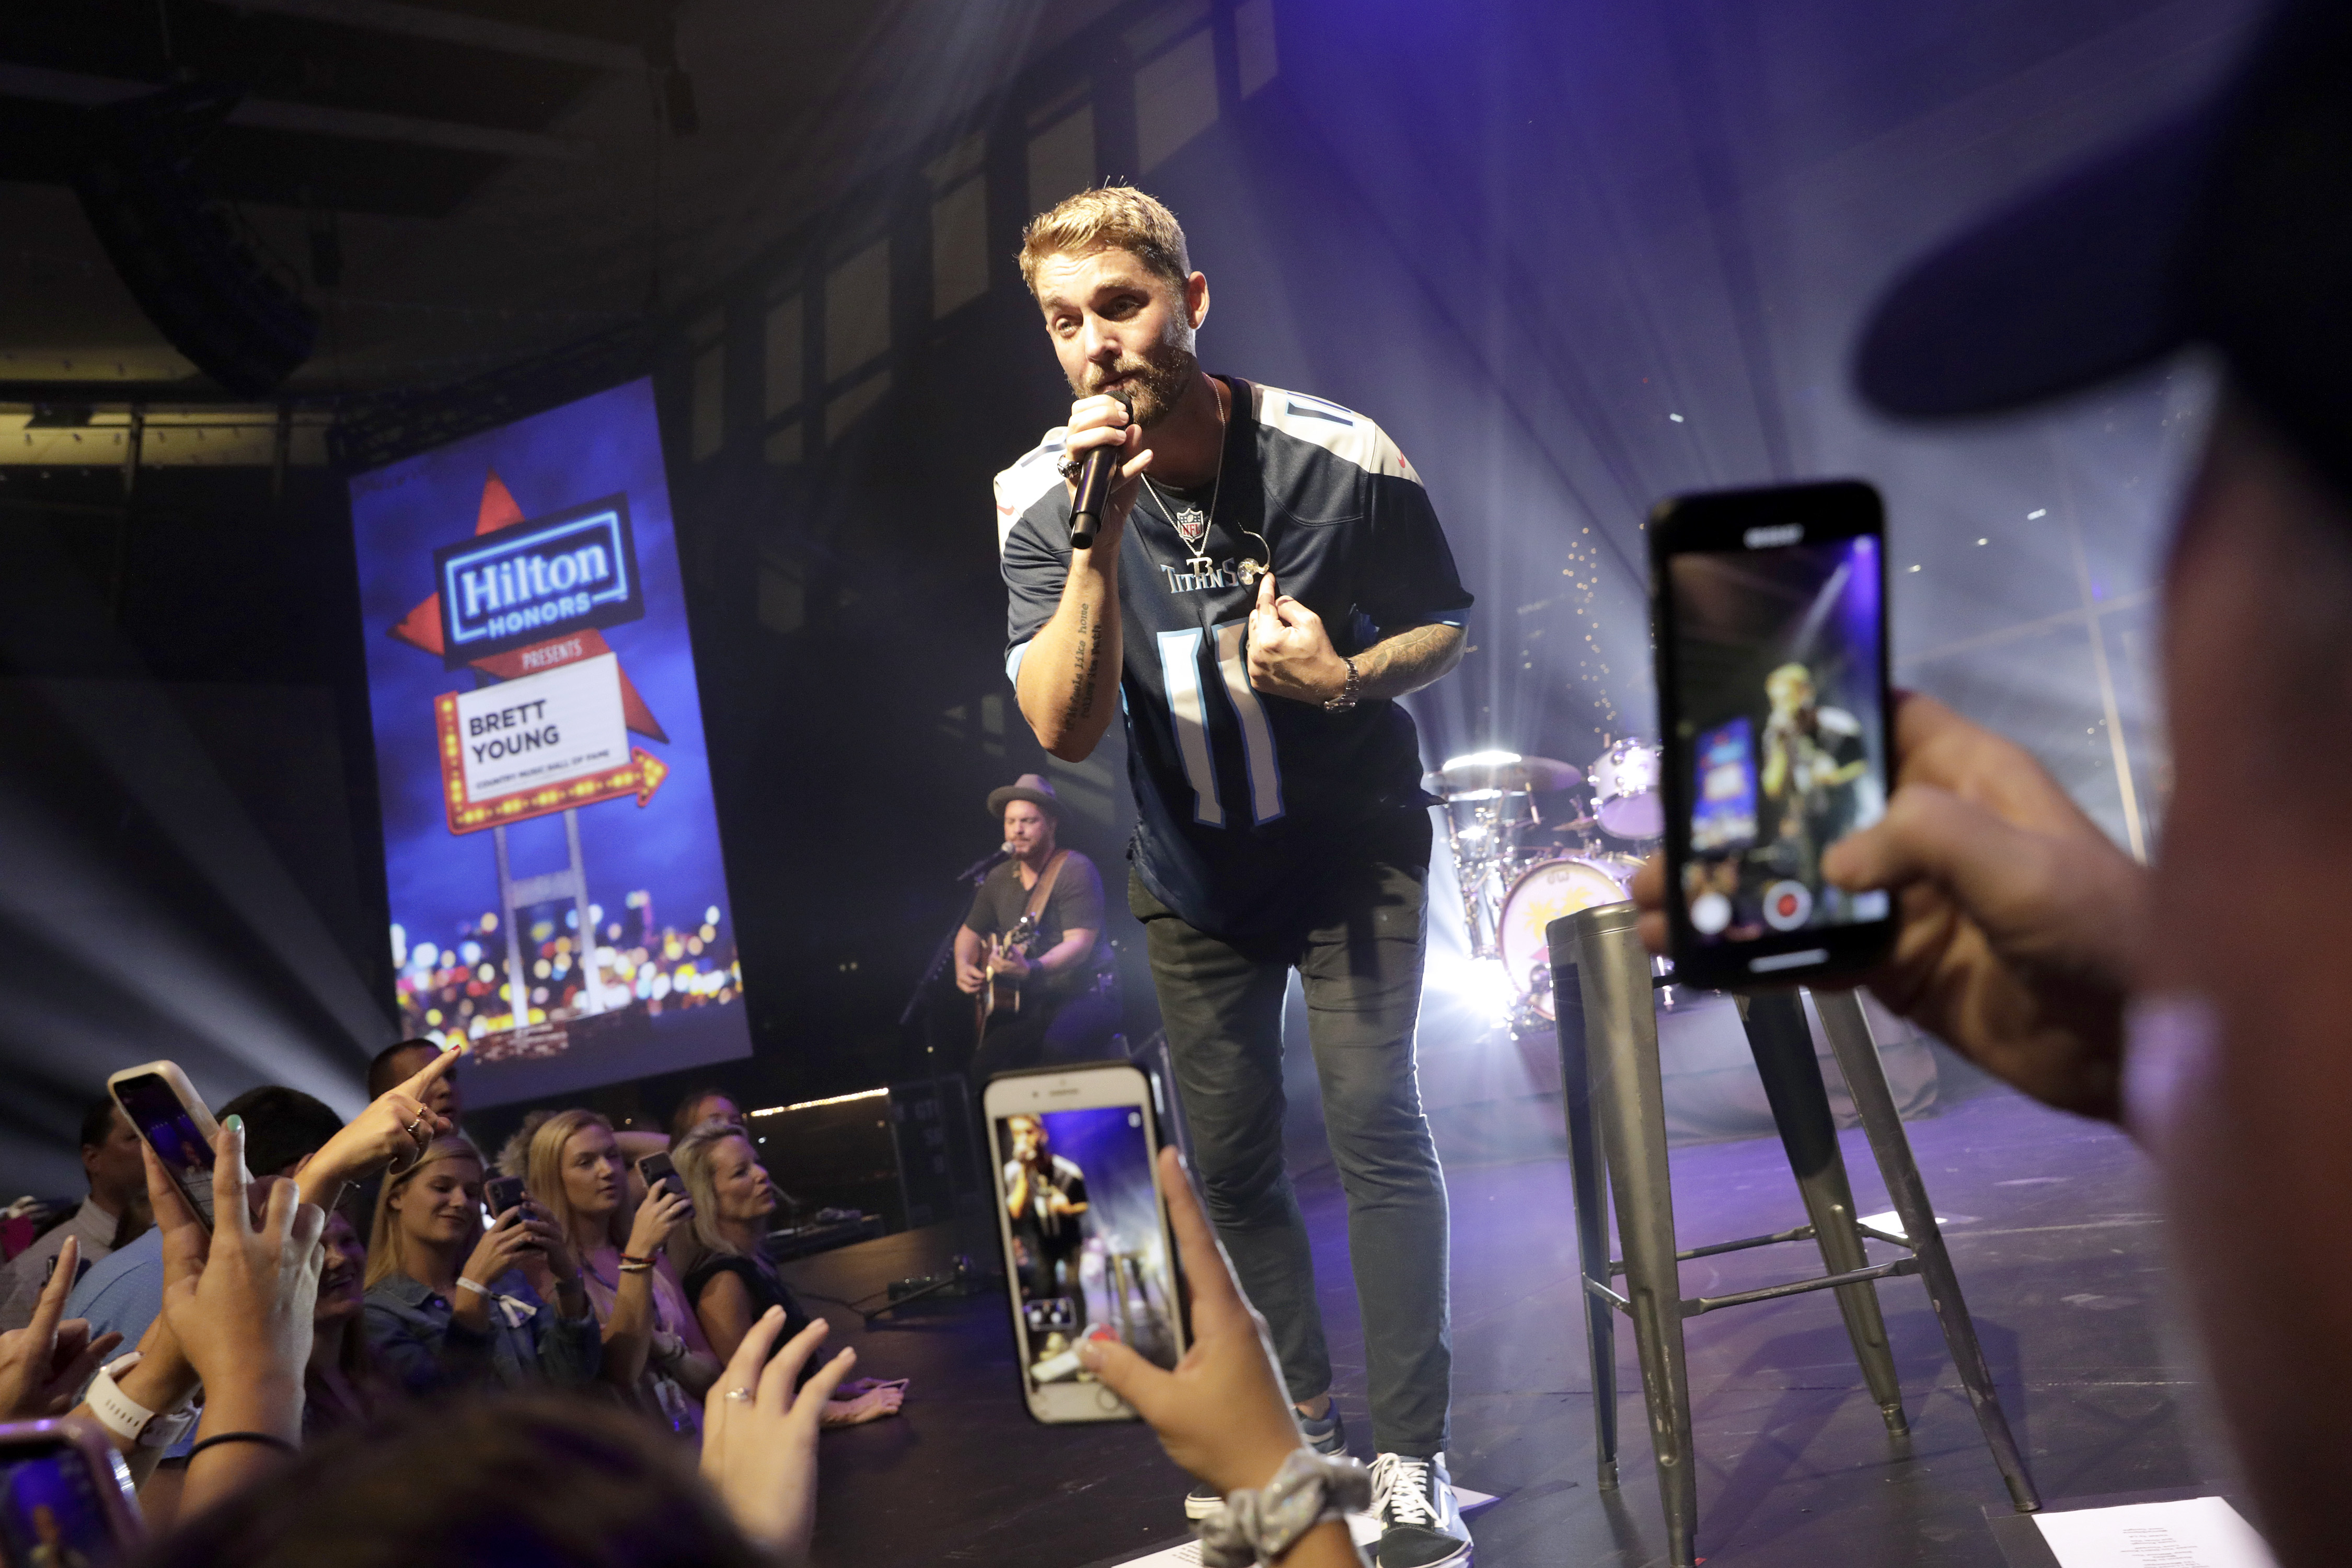 Brett Young Performs His Greatest Hits Exclusively for Hilton Honors Members